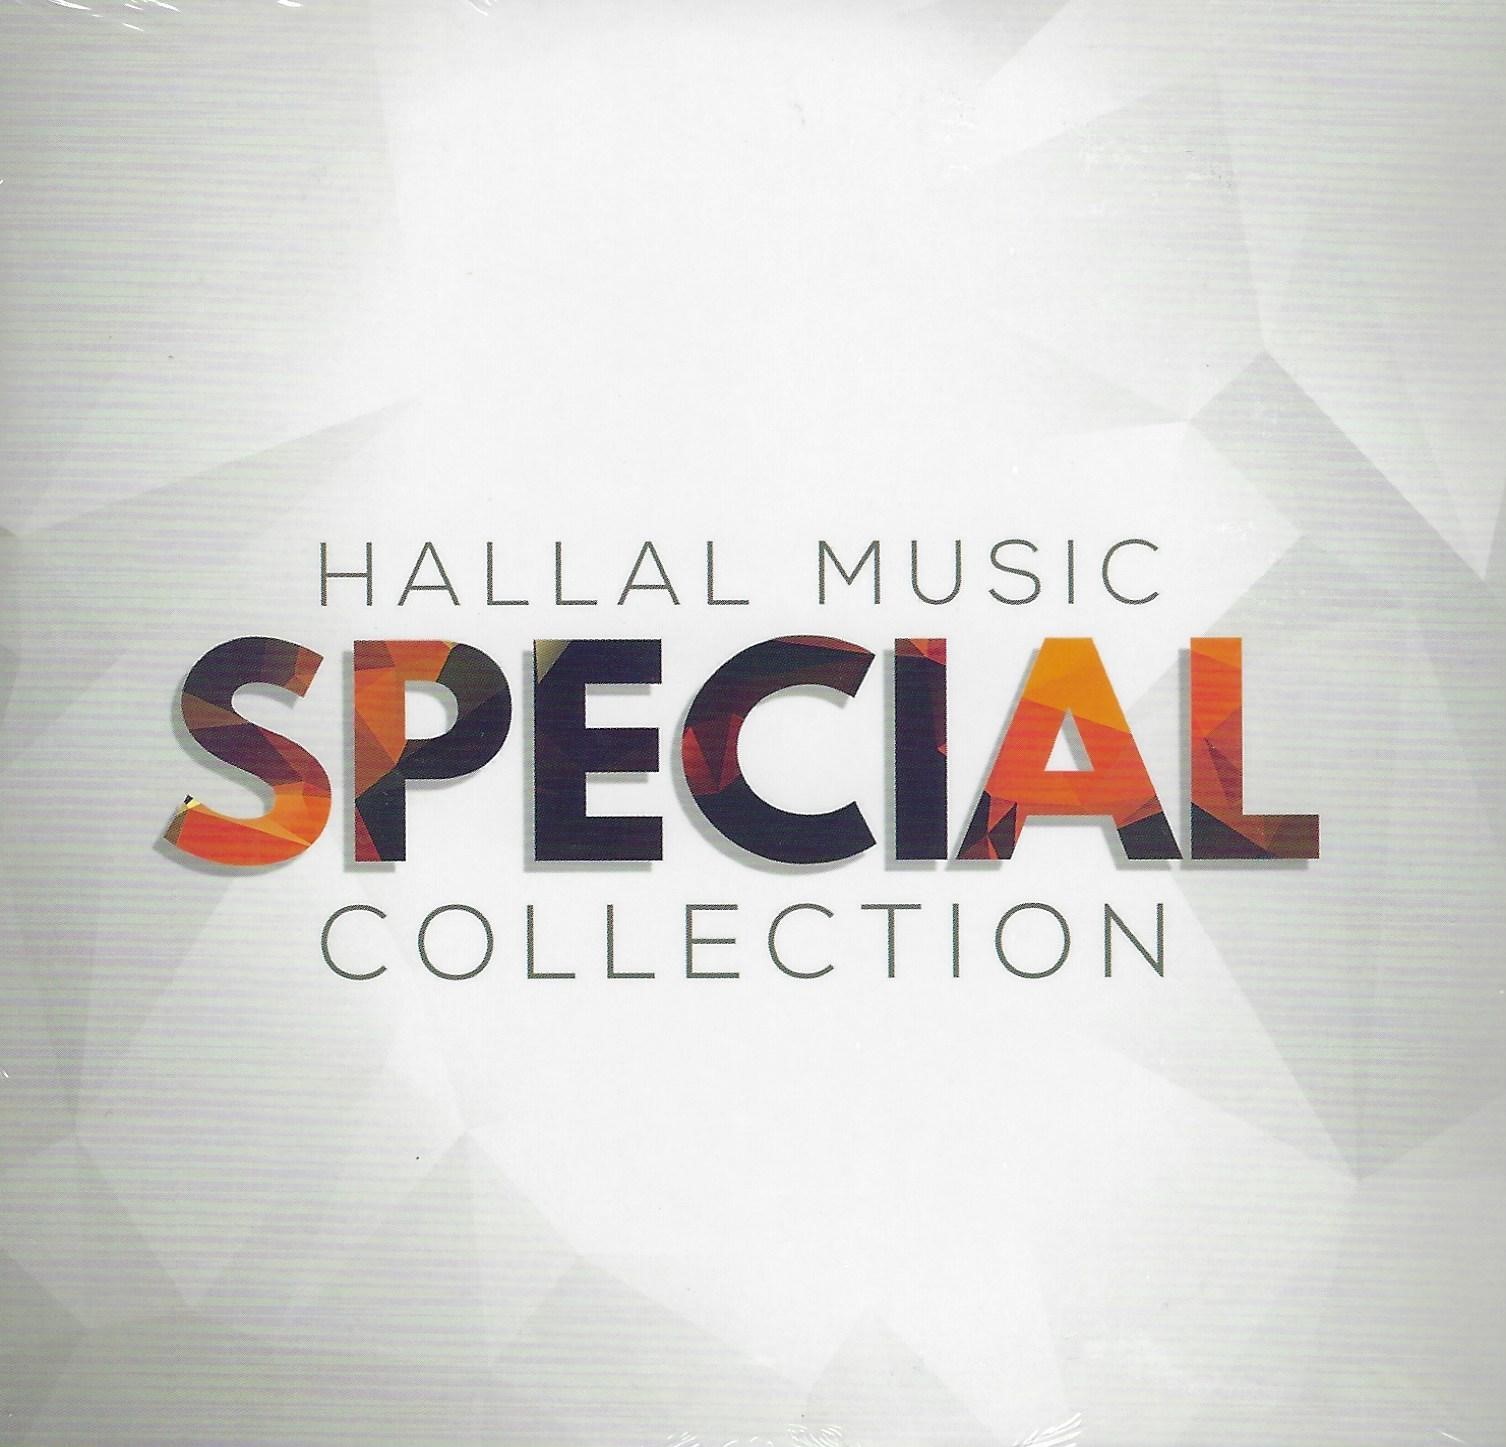 HALLAL MUSIC SPECIAL COLLECTION